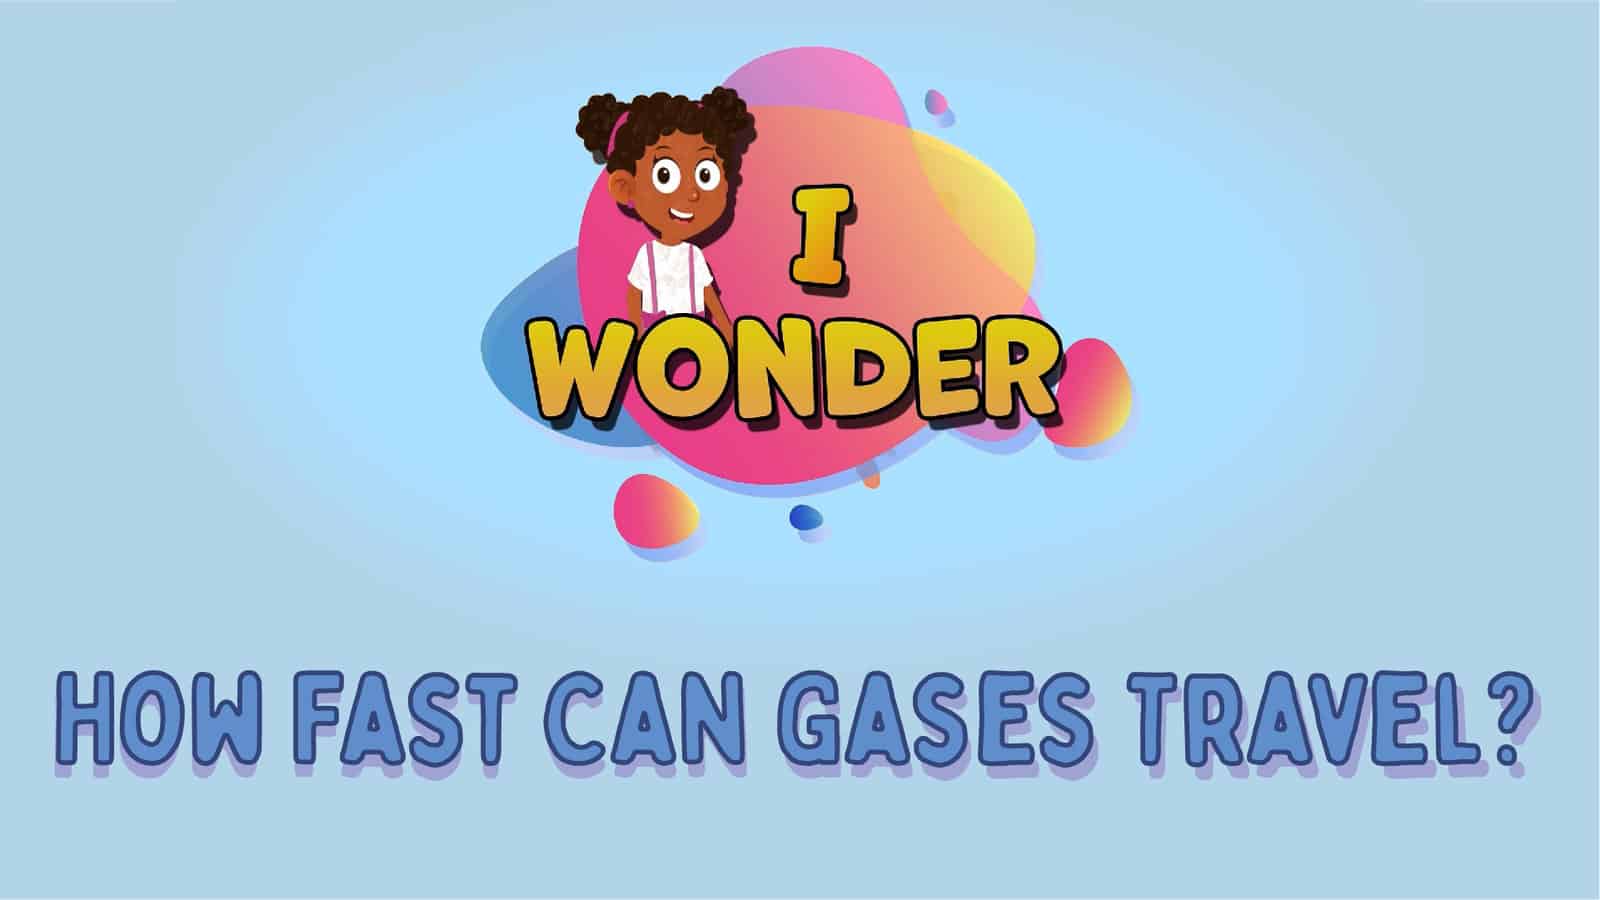 How Fast Can Gases Travel?